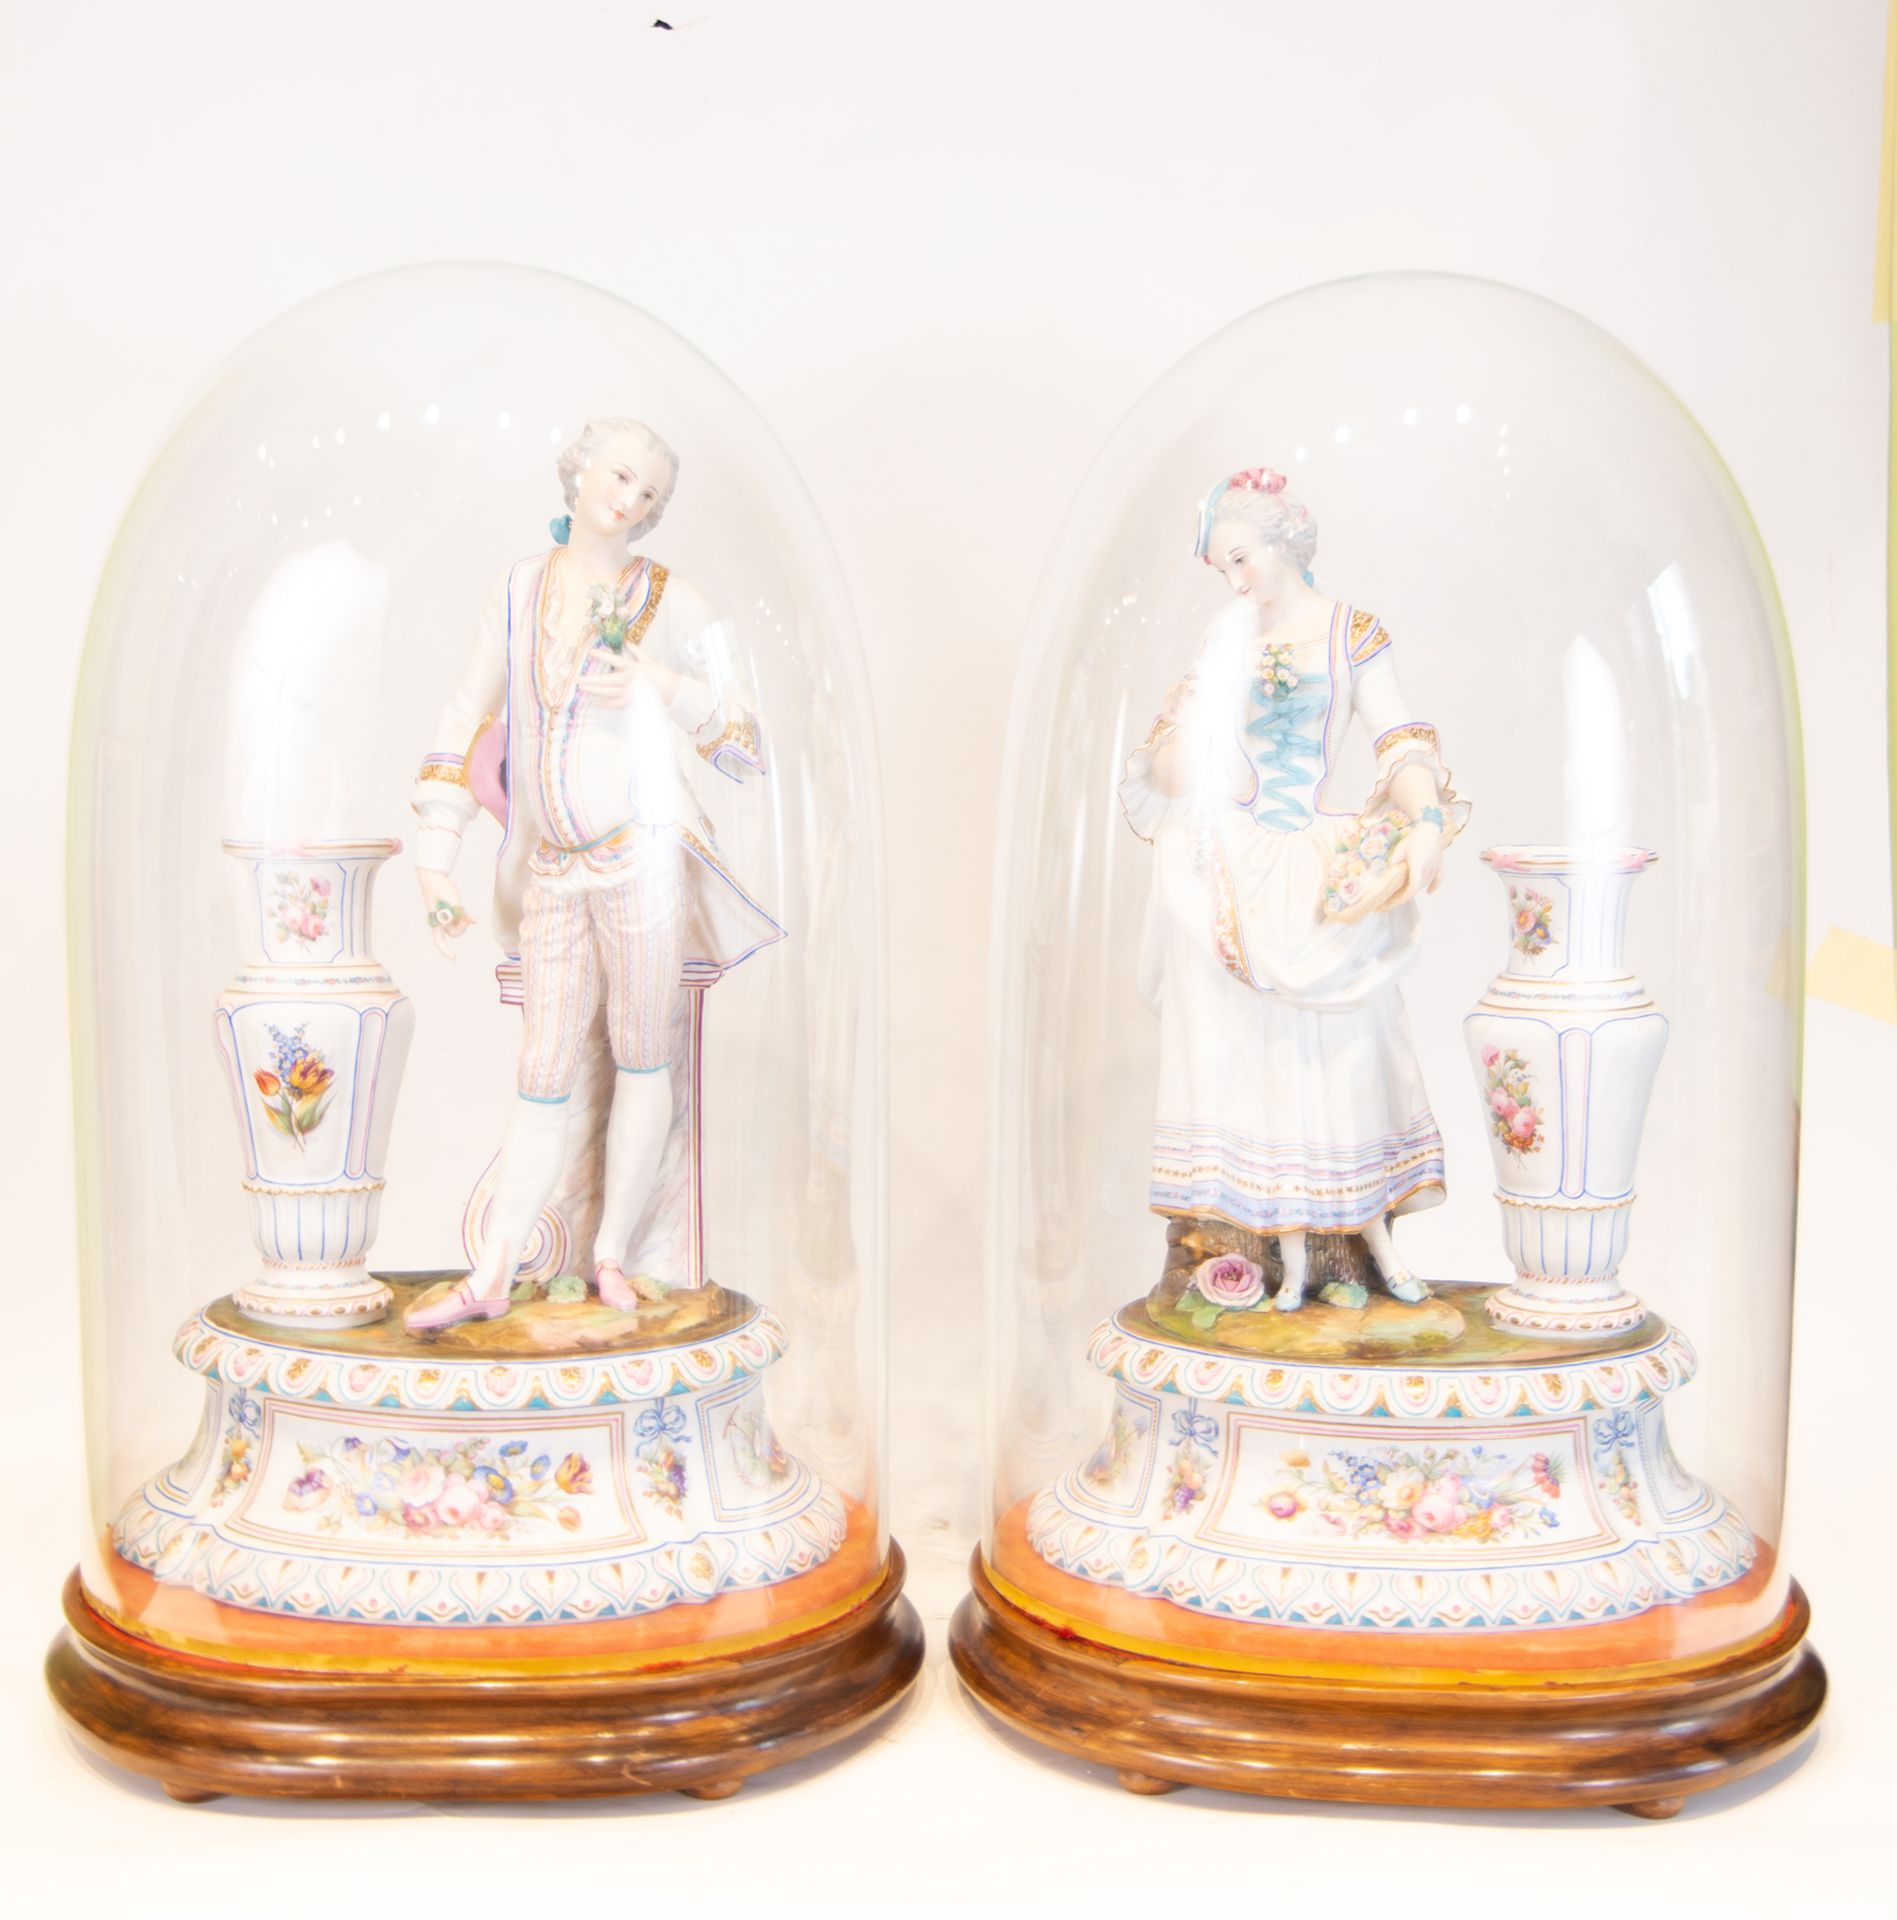 Large Pair of Figures in German Biscuit Porcelain with Crystal lanterns, German school of the 19th c